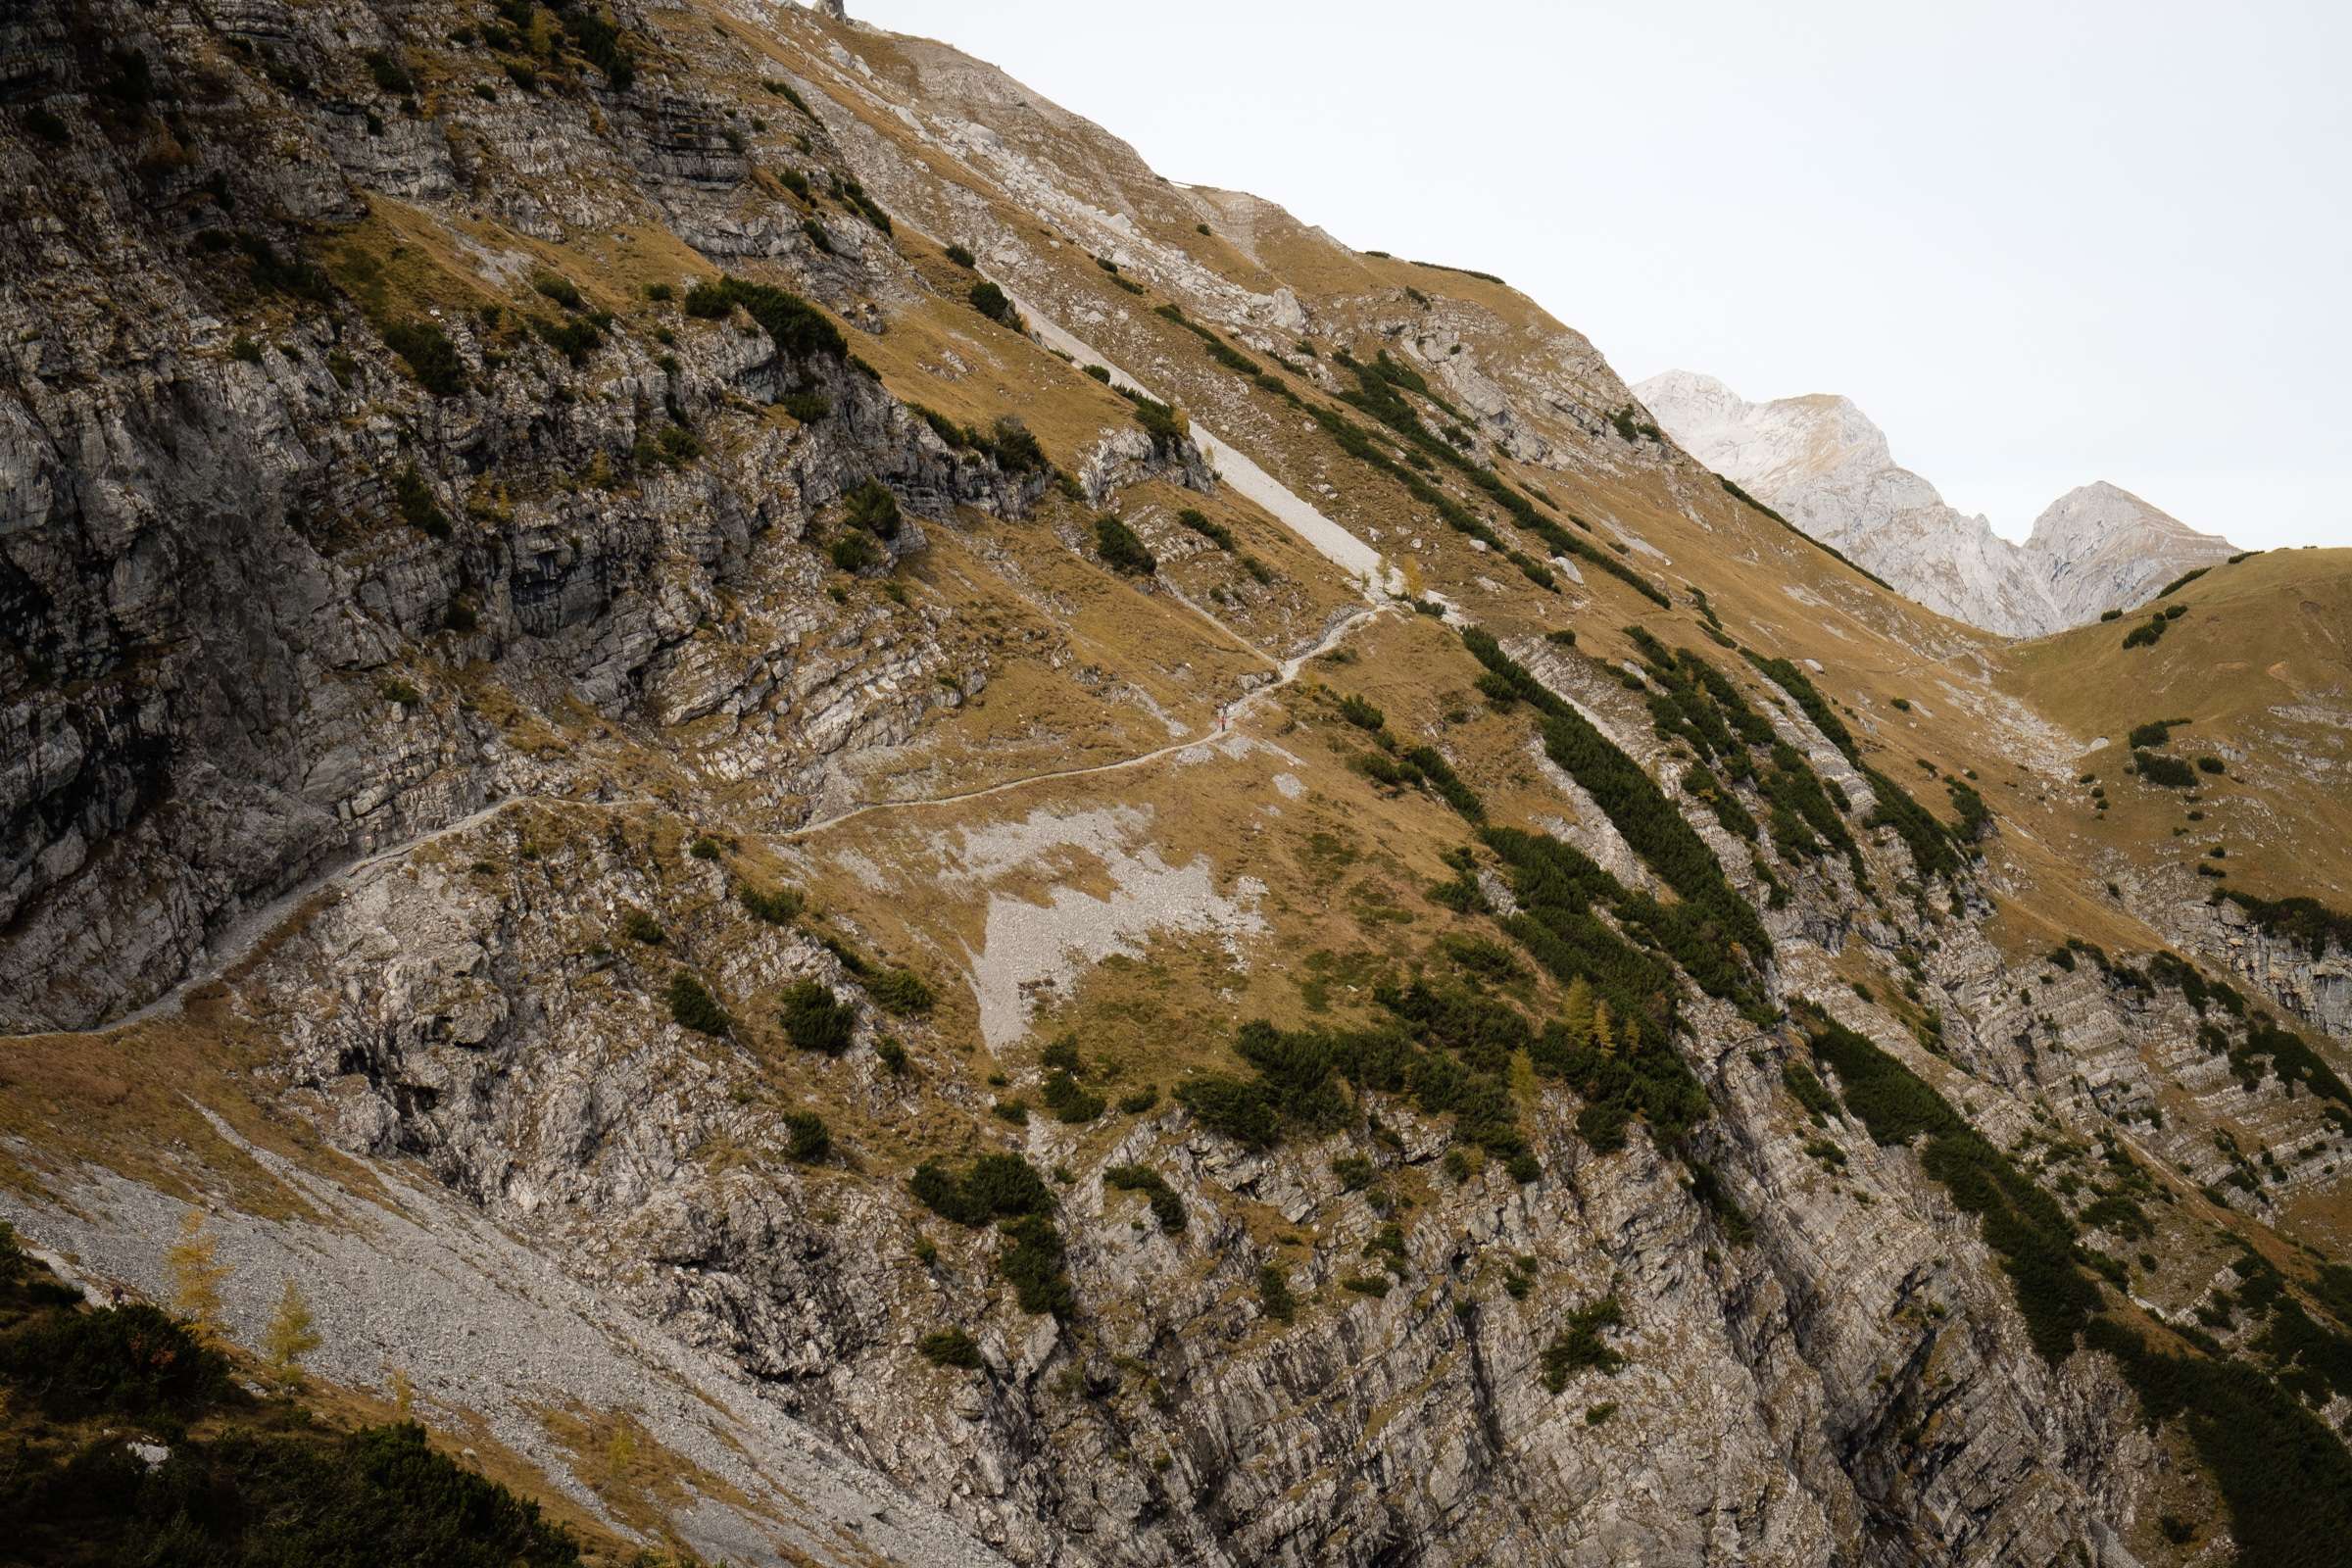 The trail where it crosses Lamsenjoch Saddle, steep cliffs and a small terrifying path